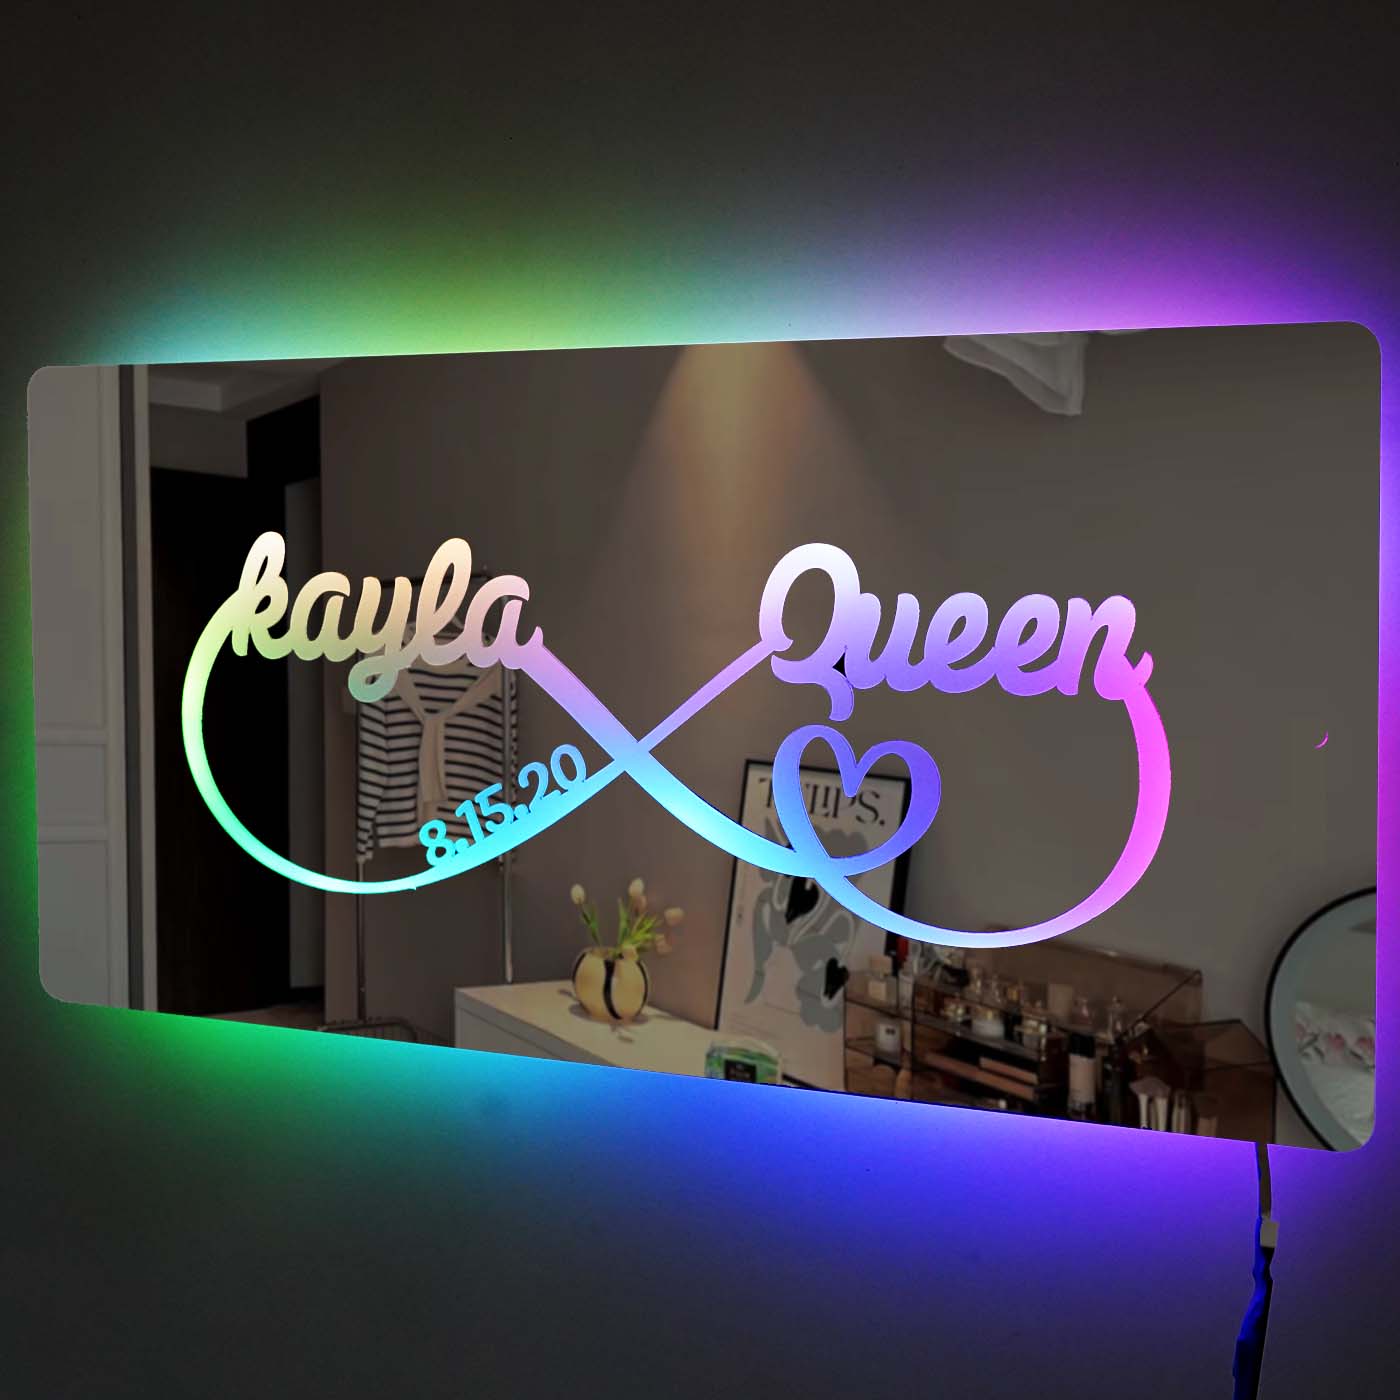 Hot Sale Personalized Name Infinity Sign Light Up Mirror【BUY 2 GET FREE SHIPPING】